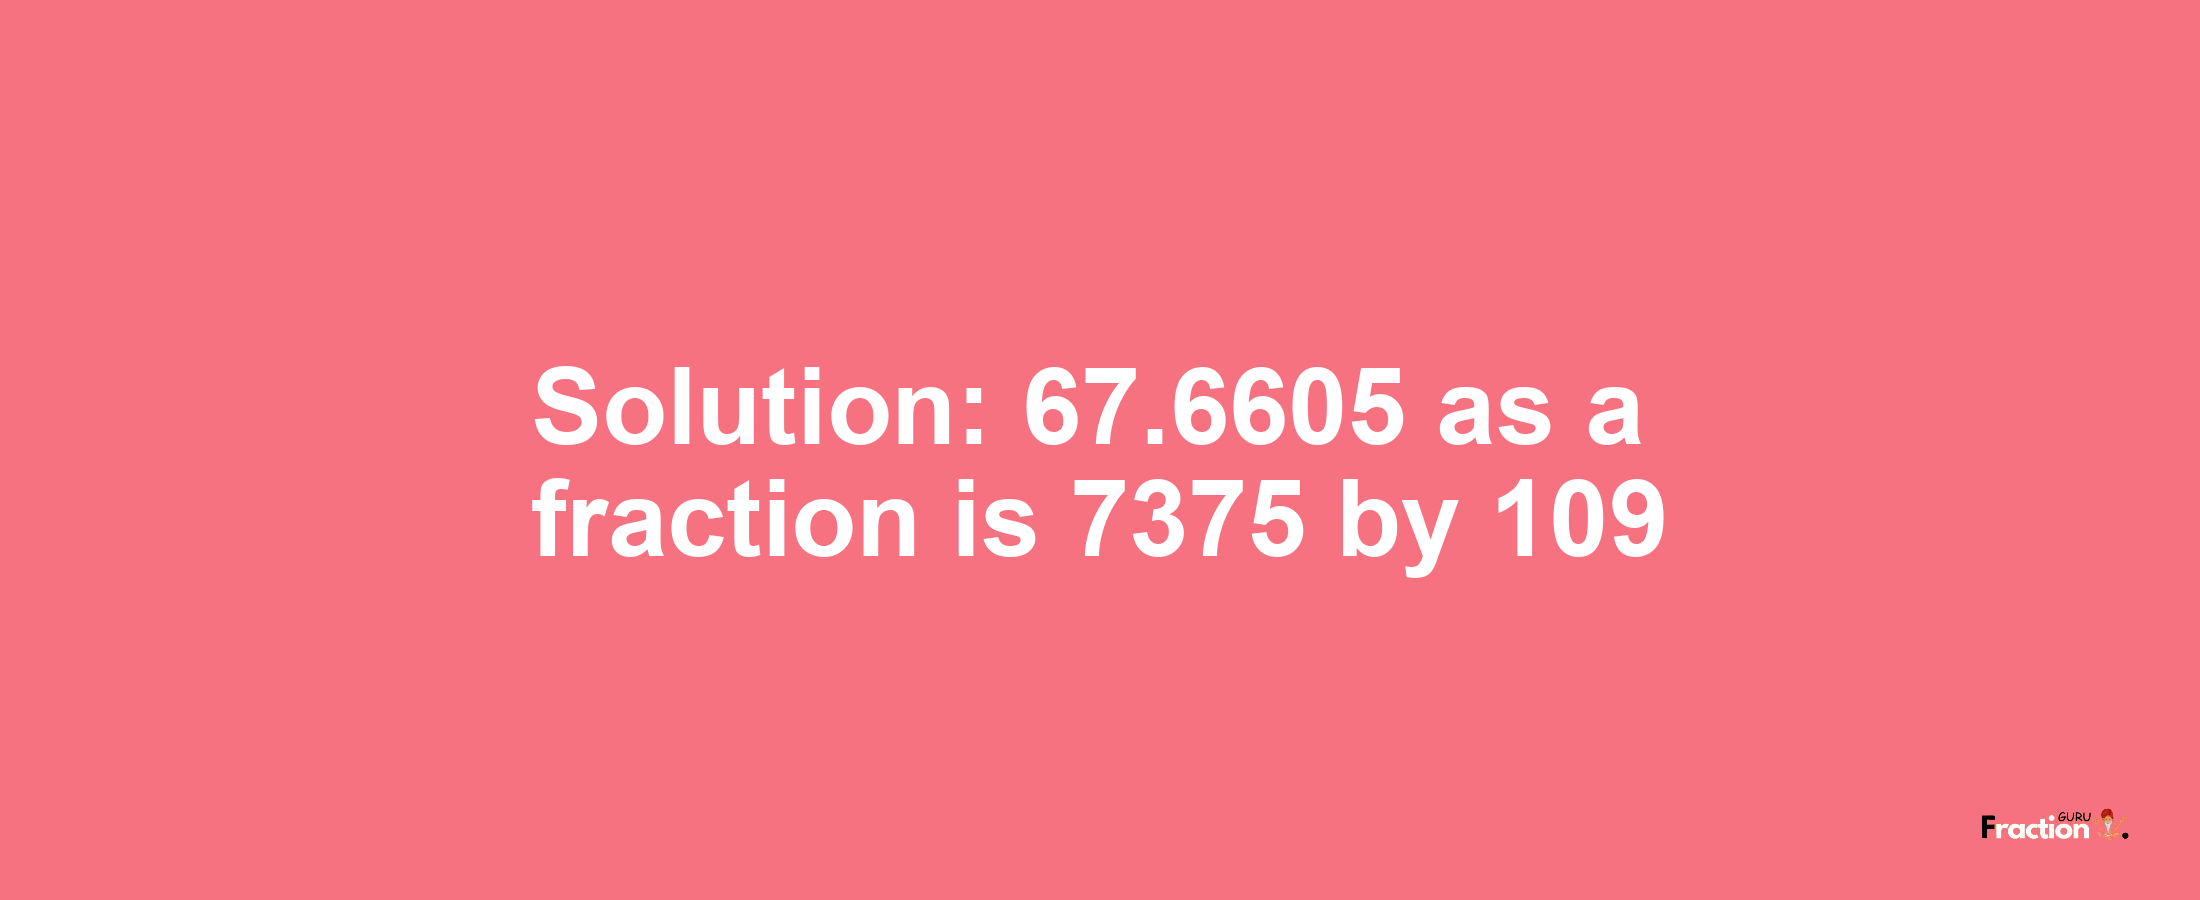 Solution:67.6605 as a fraction is 7375/109